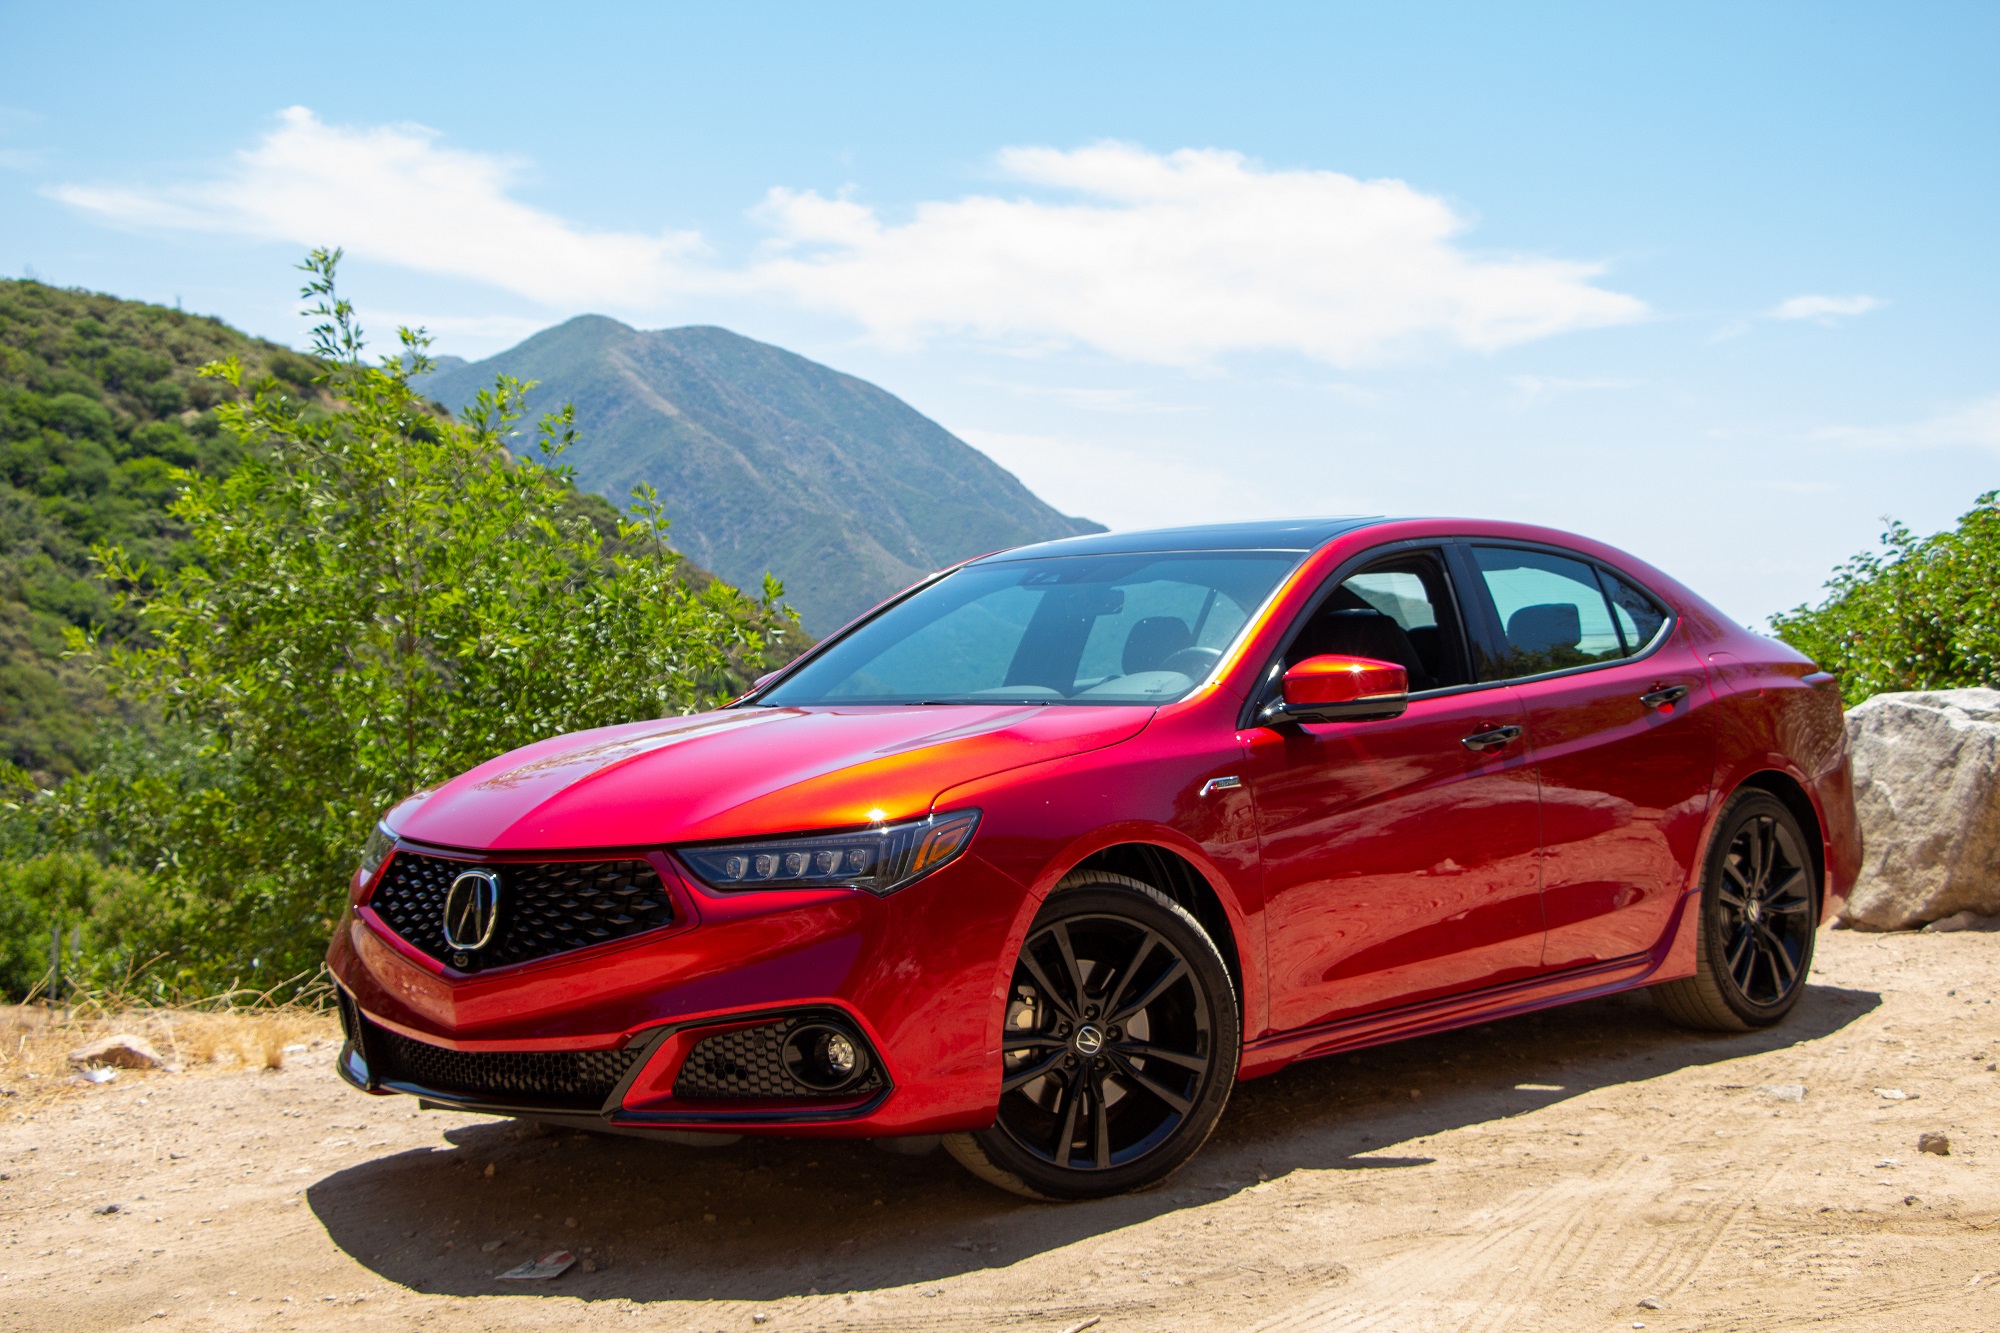 2020 Acura TLX PMC Edition Jake Stumph Drive Review A-SPEC Valencia Red Pearl Nano Pigment Paint